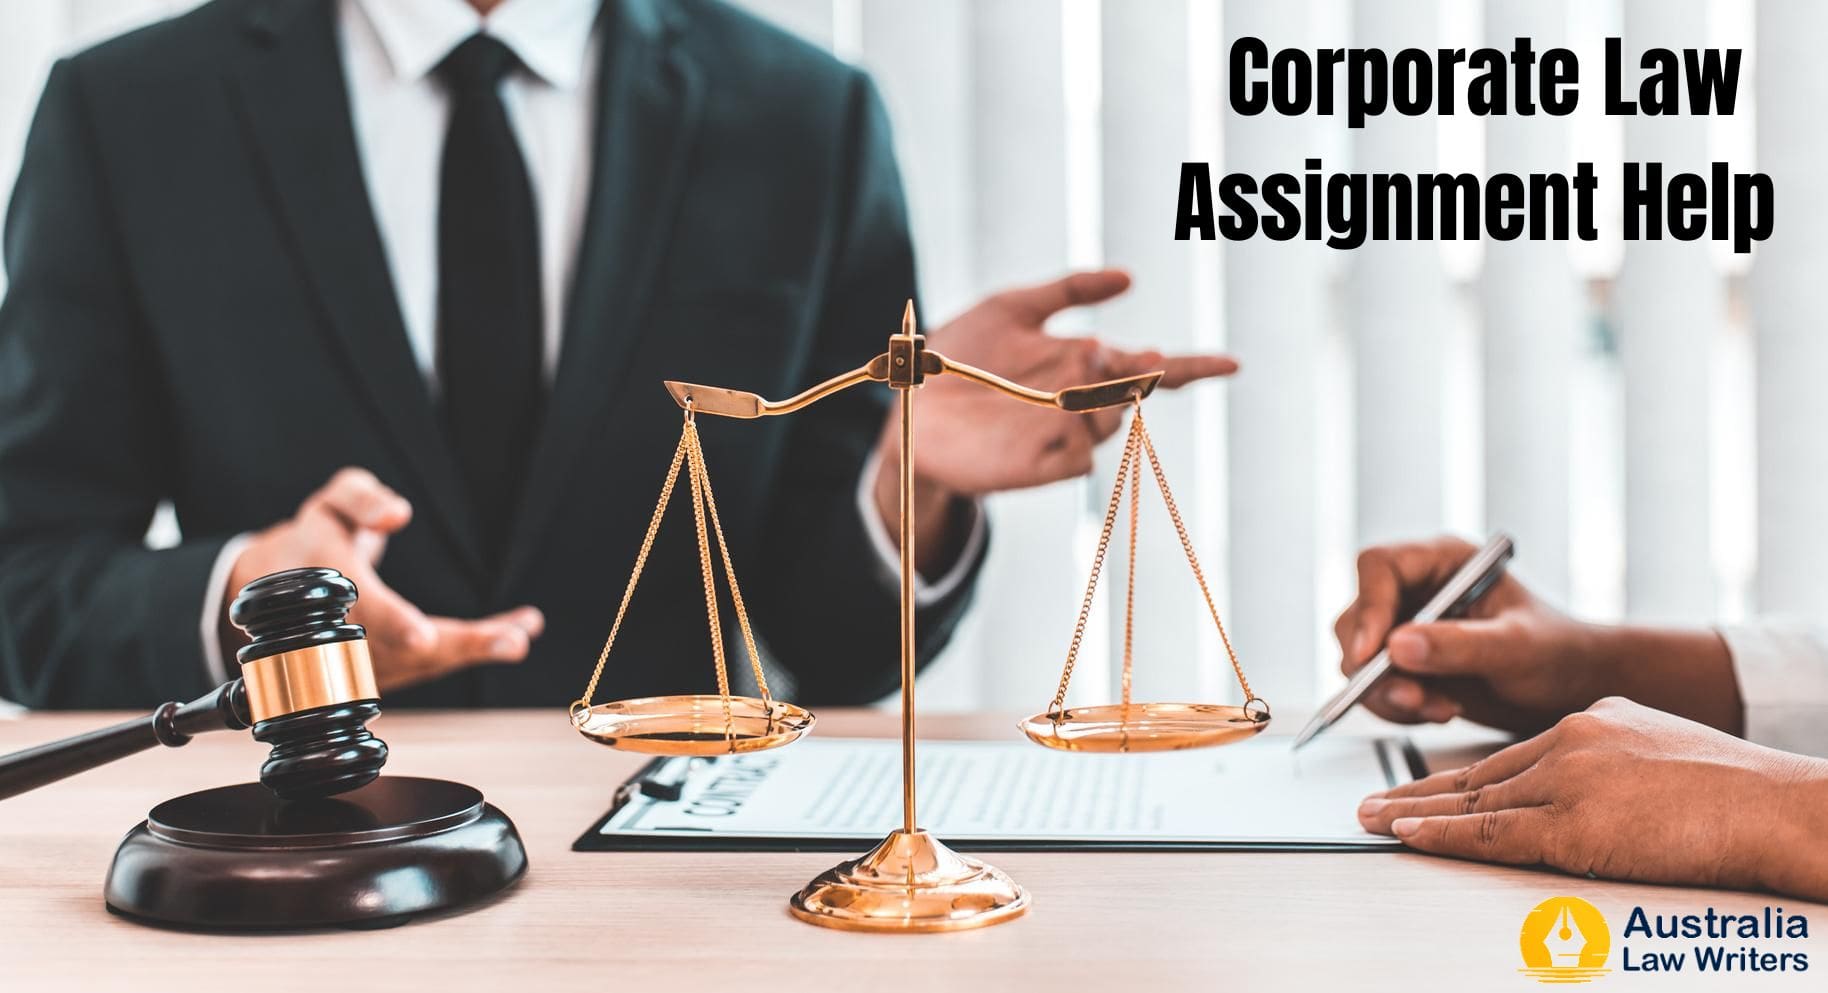 Access Top-notch Corporate Law Assignment Help from Renowned Australian Professionals